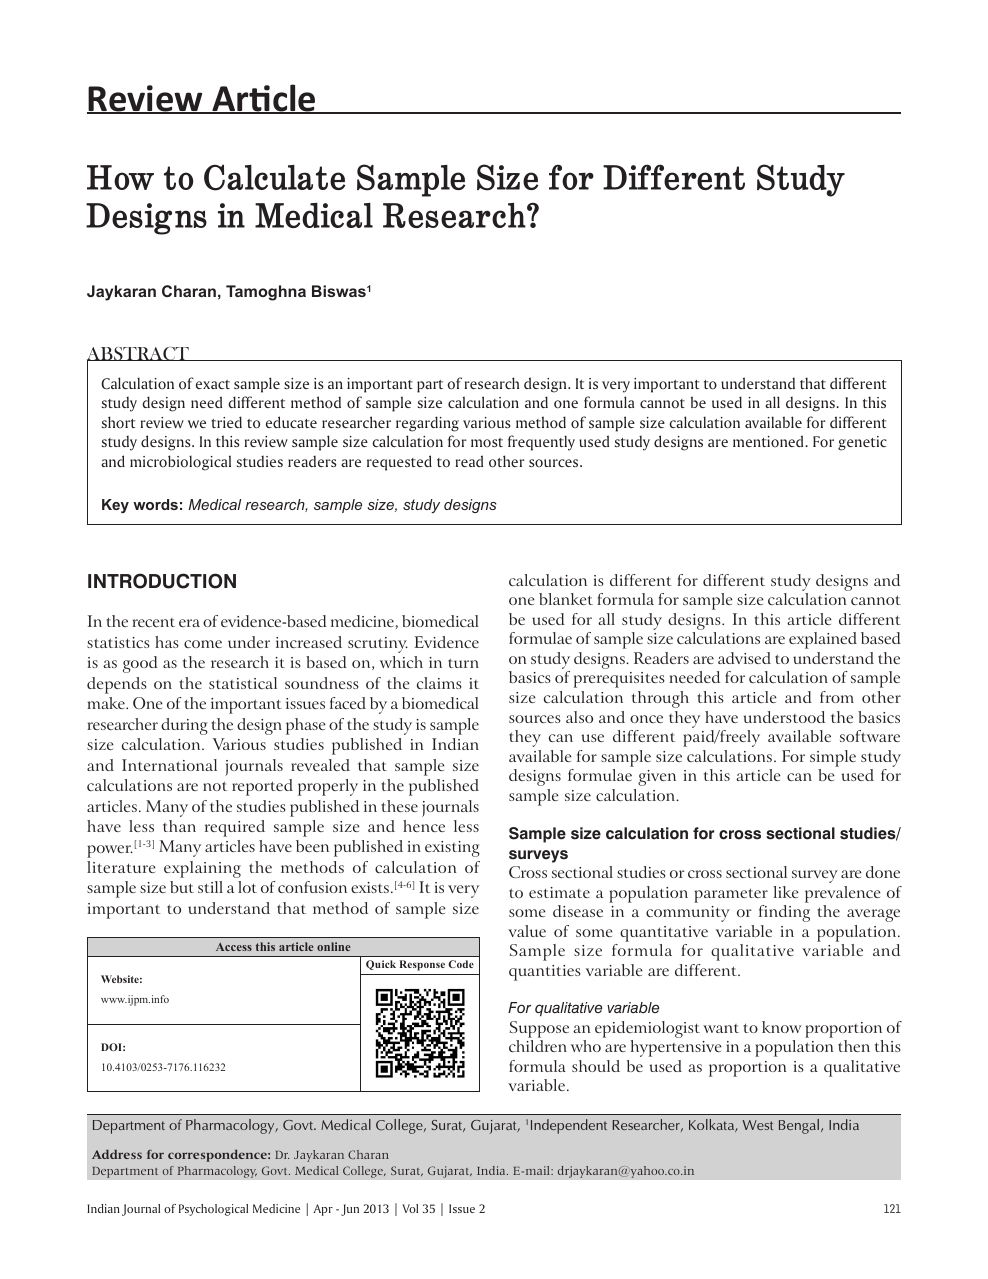 How To Calculate Sample Size For Different Study Designs In Medical Research Topic Of Research Paper In Clinical Medicine Download Scholarly Article Pdf And Read For Free On Cyberleninka Open Science